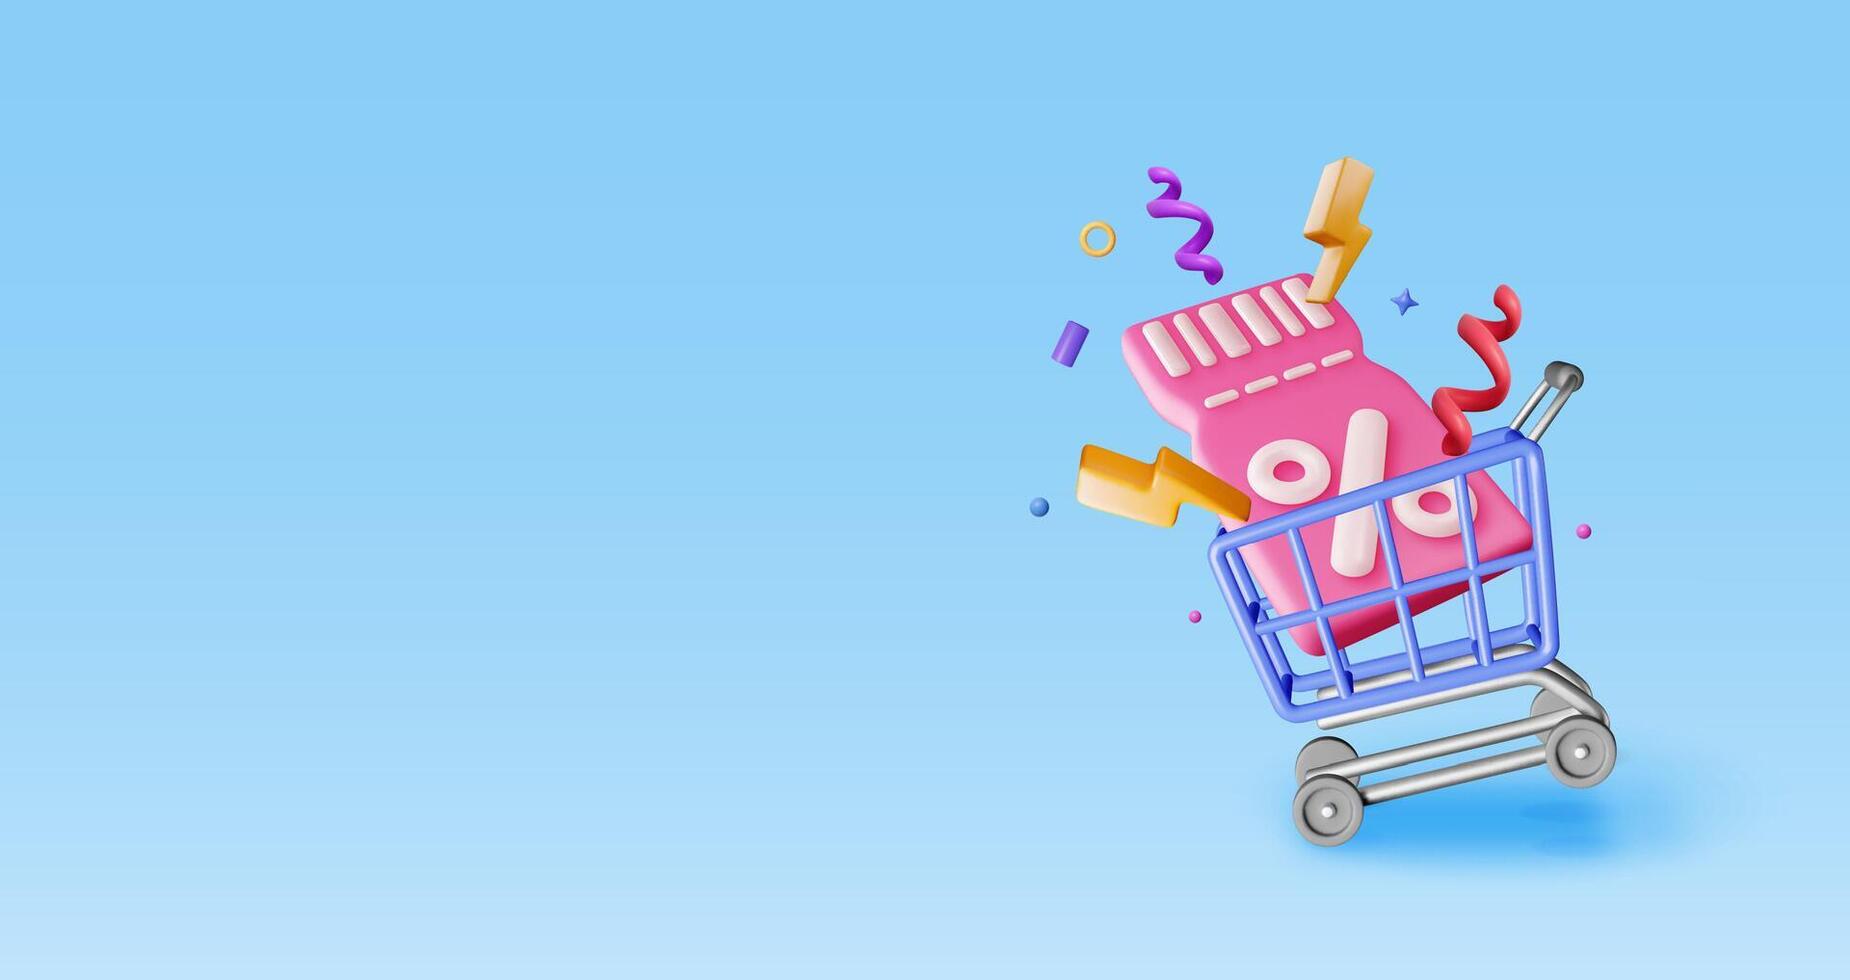 3d shopping basket and coupon with percentage symbol. Render realistic shopping cart and colorful confetti around discount voucher. Sale discount clearance. Online retail shopping. vector